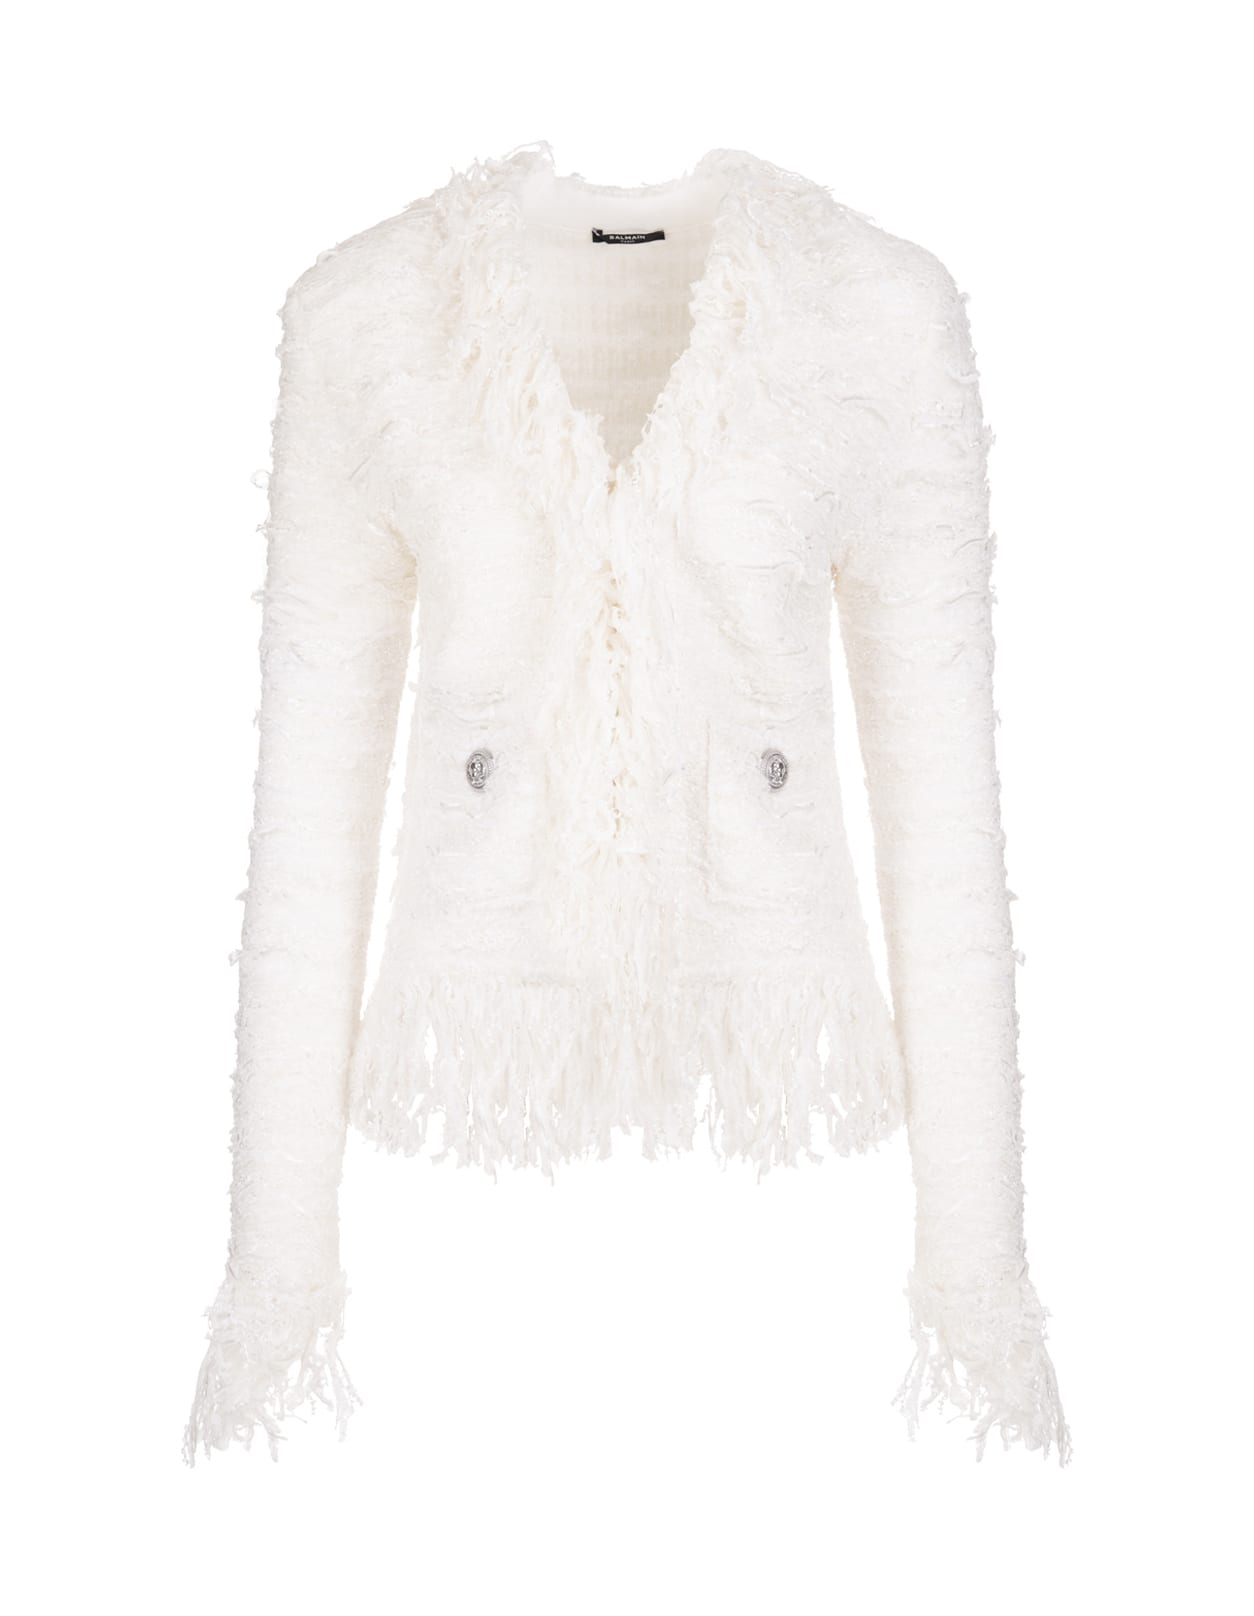 Balmain Woman Jacket In White Tweed With Silver Embossed Buttons